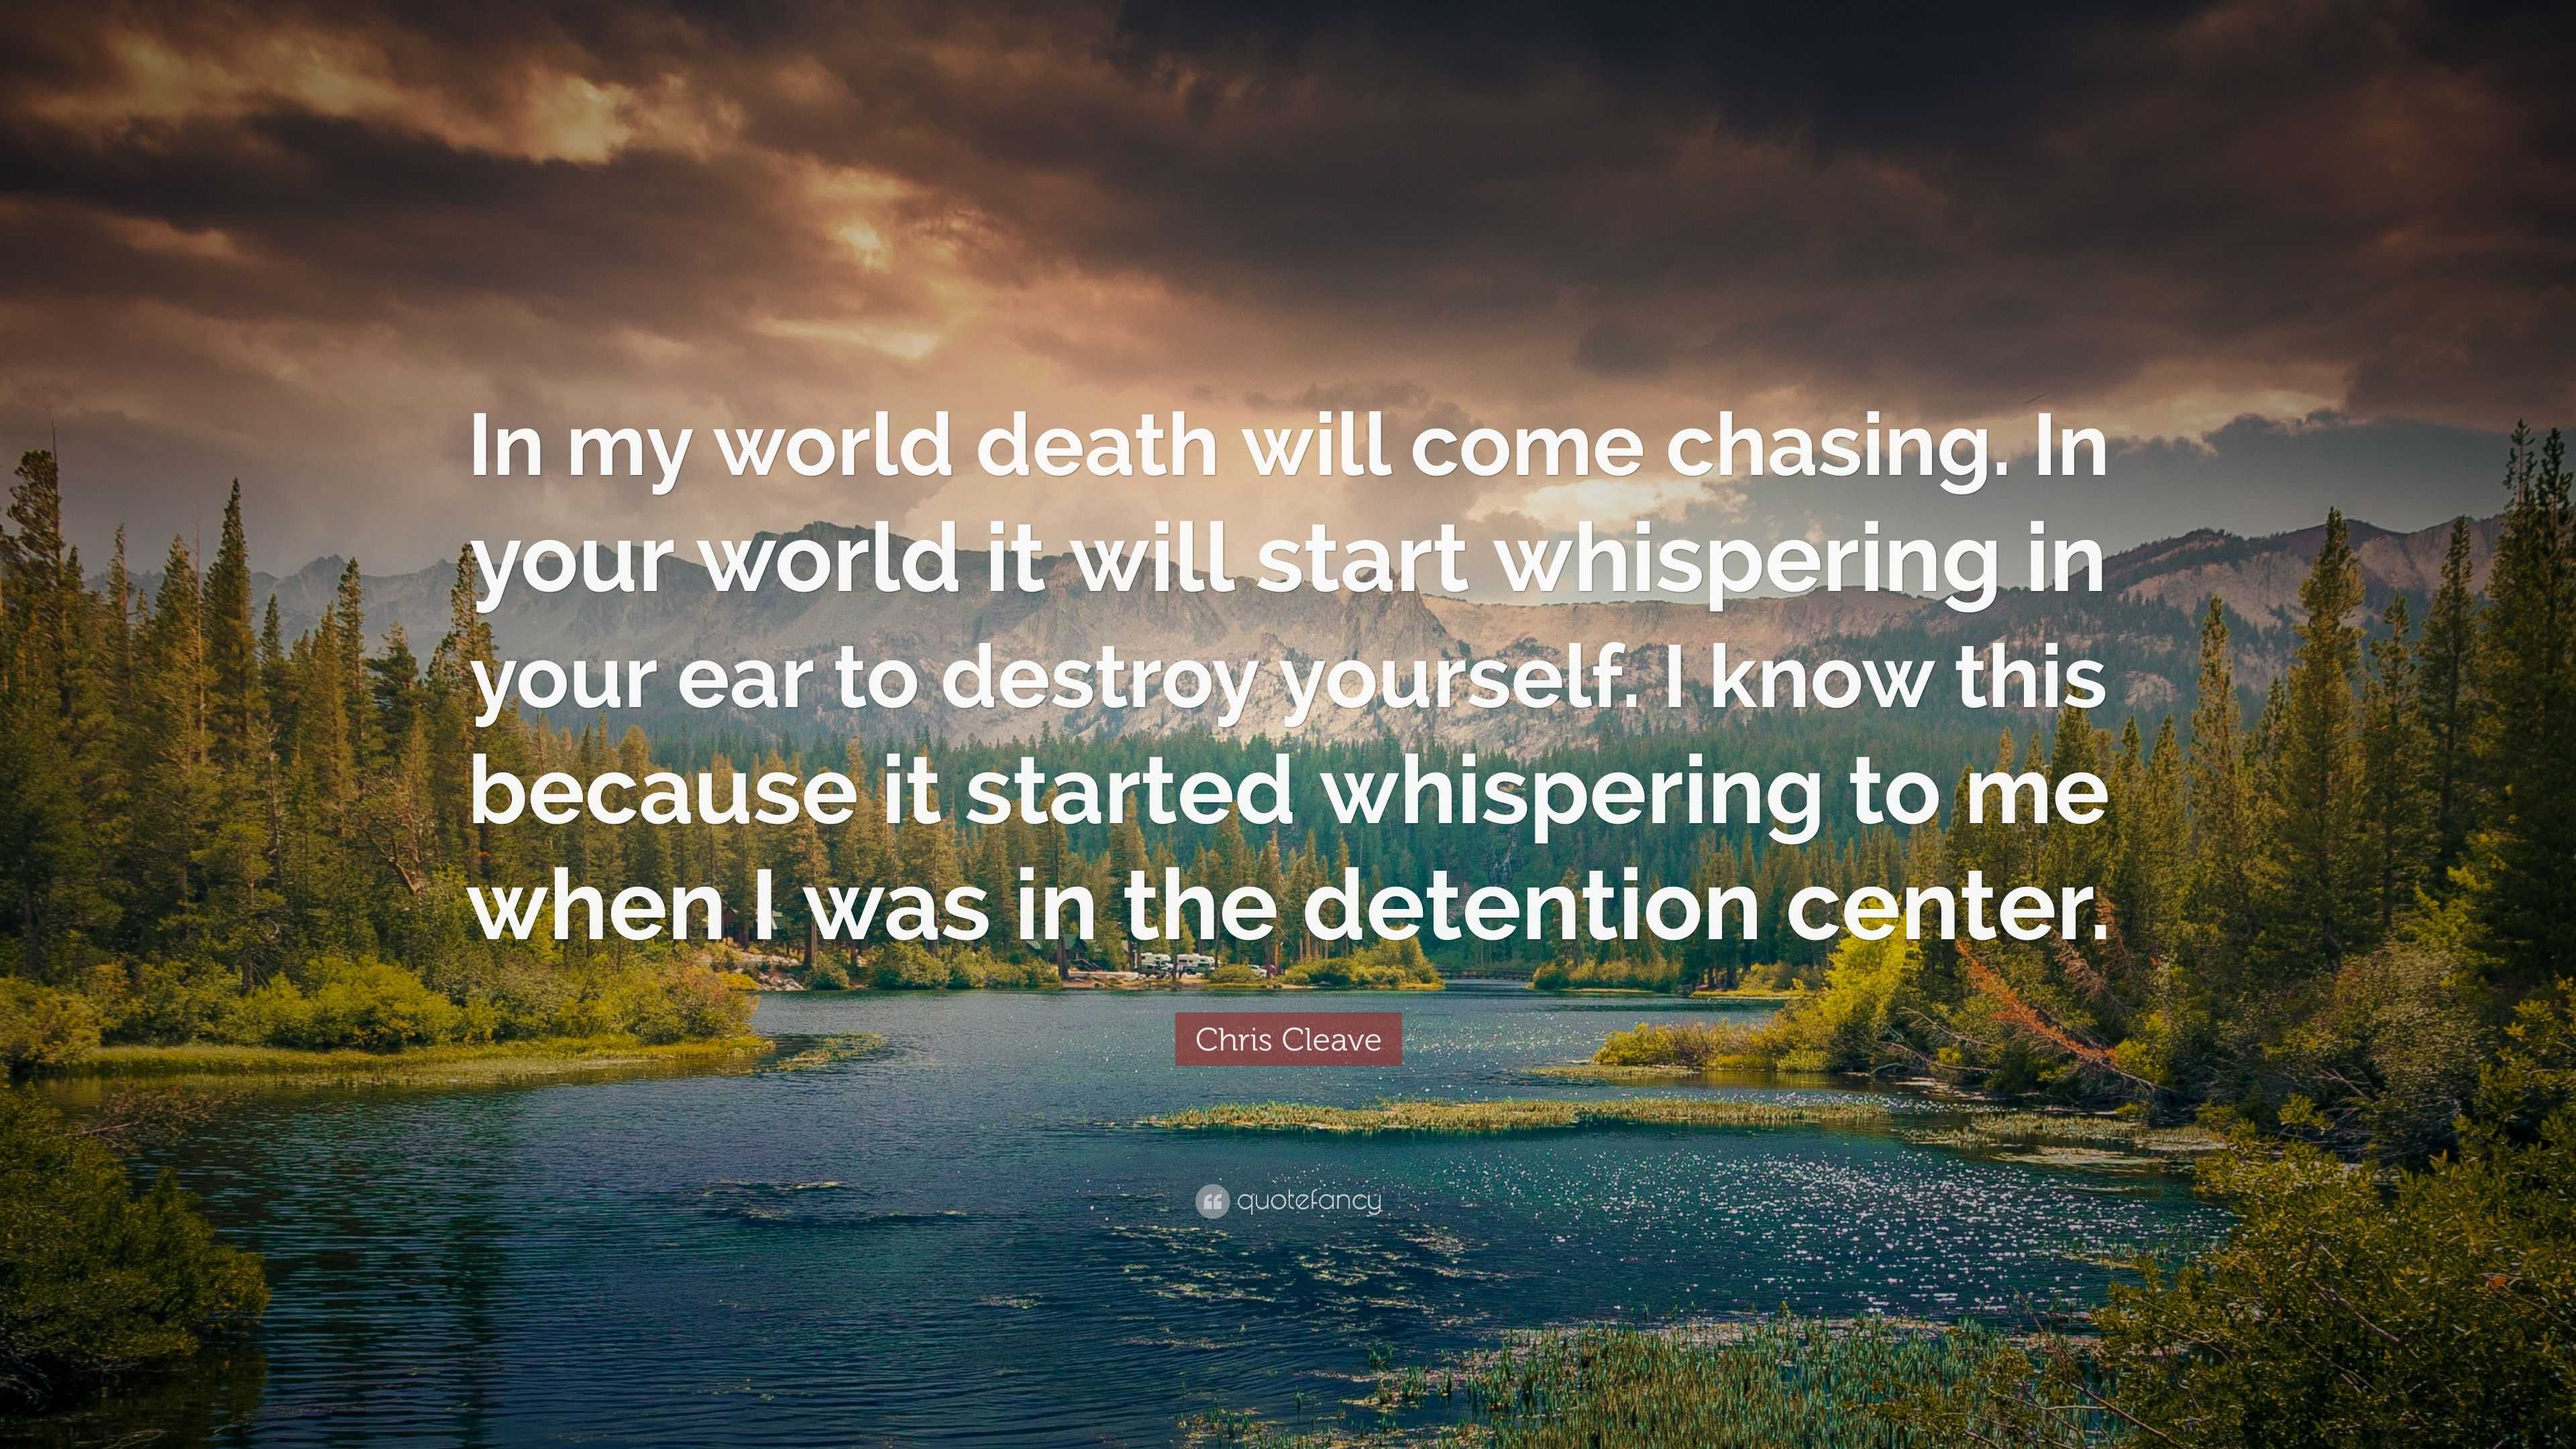 Chris Cleave Quote: “In my world death will come chasing. In your world ...